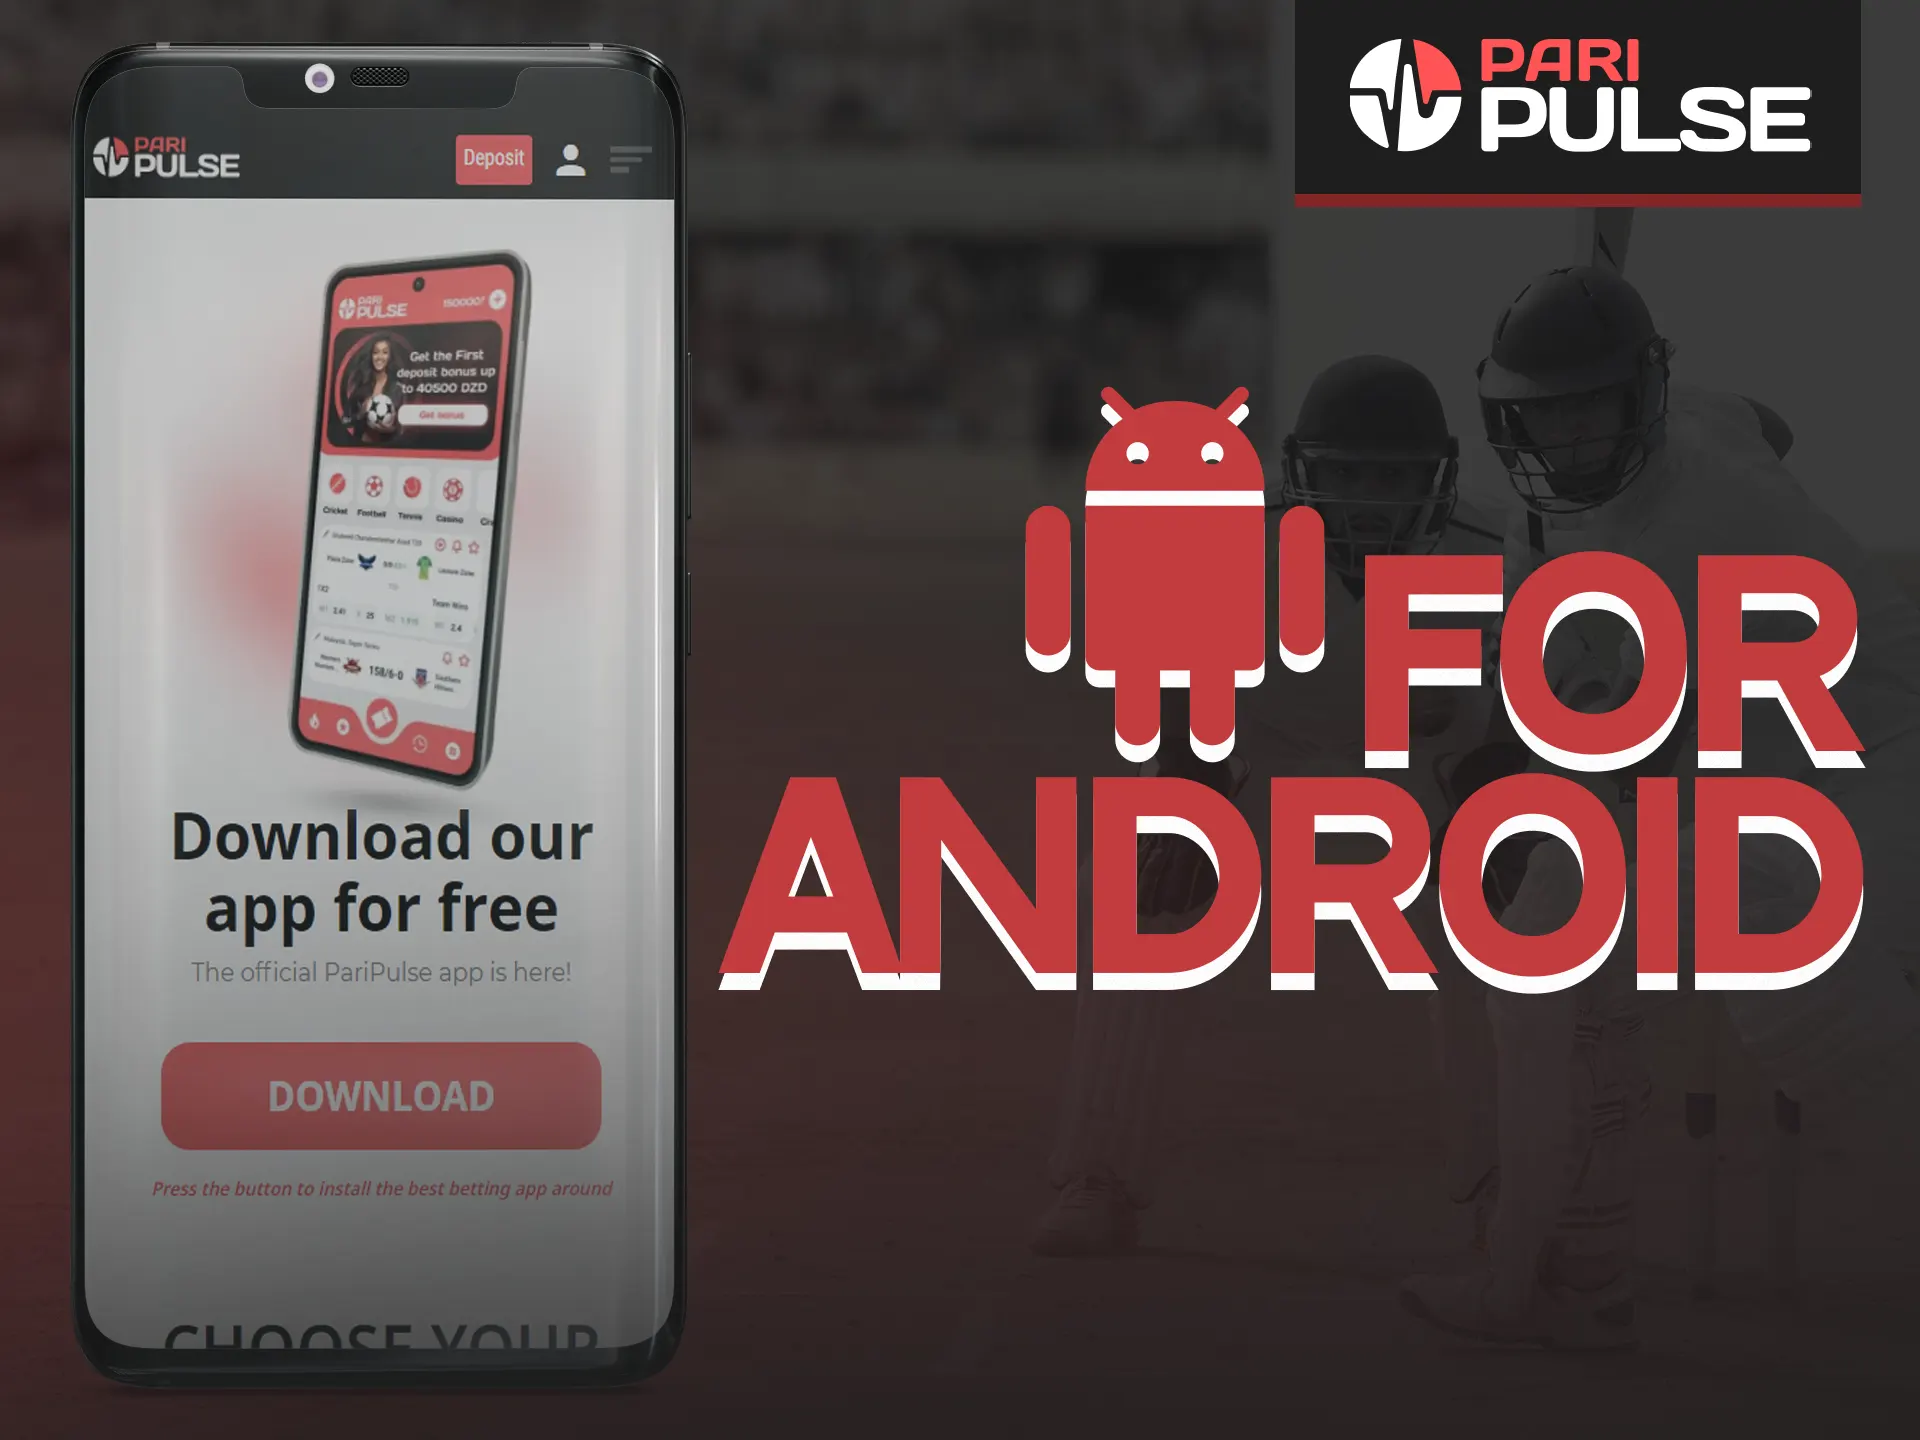 Start the process of installing the PariPulse app on your Android device.